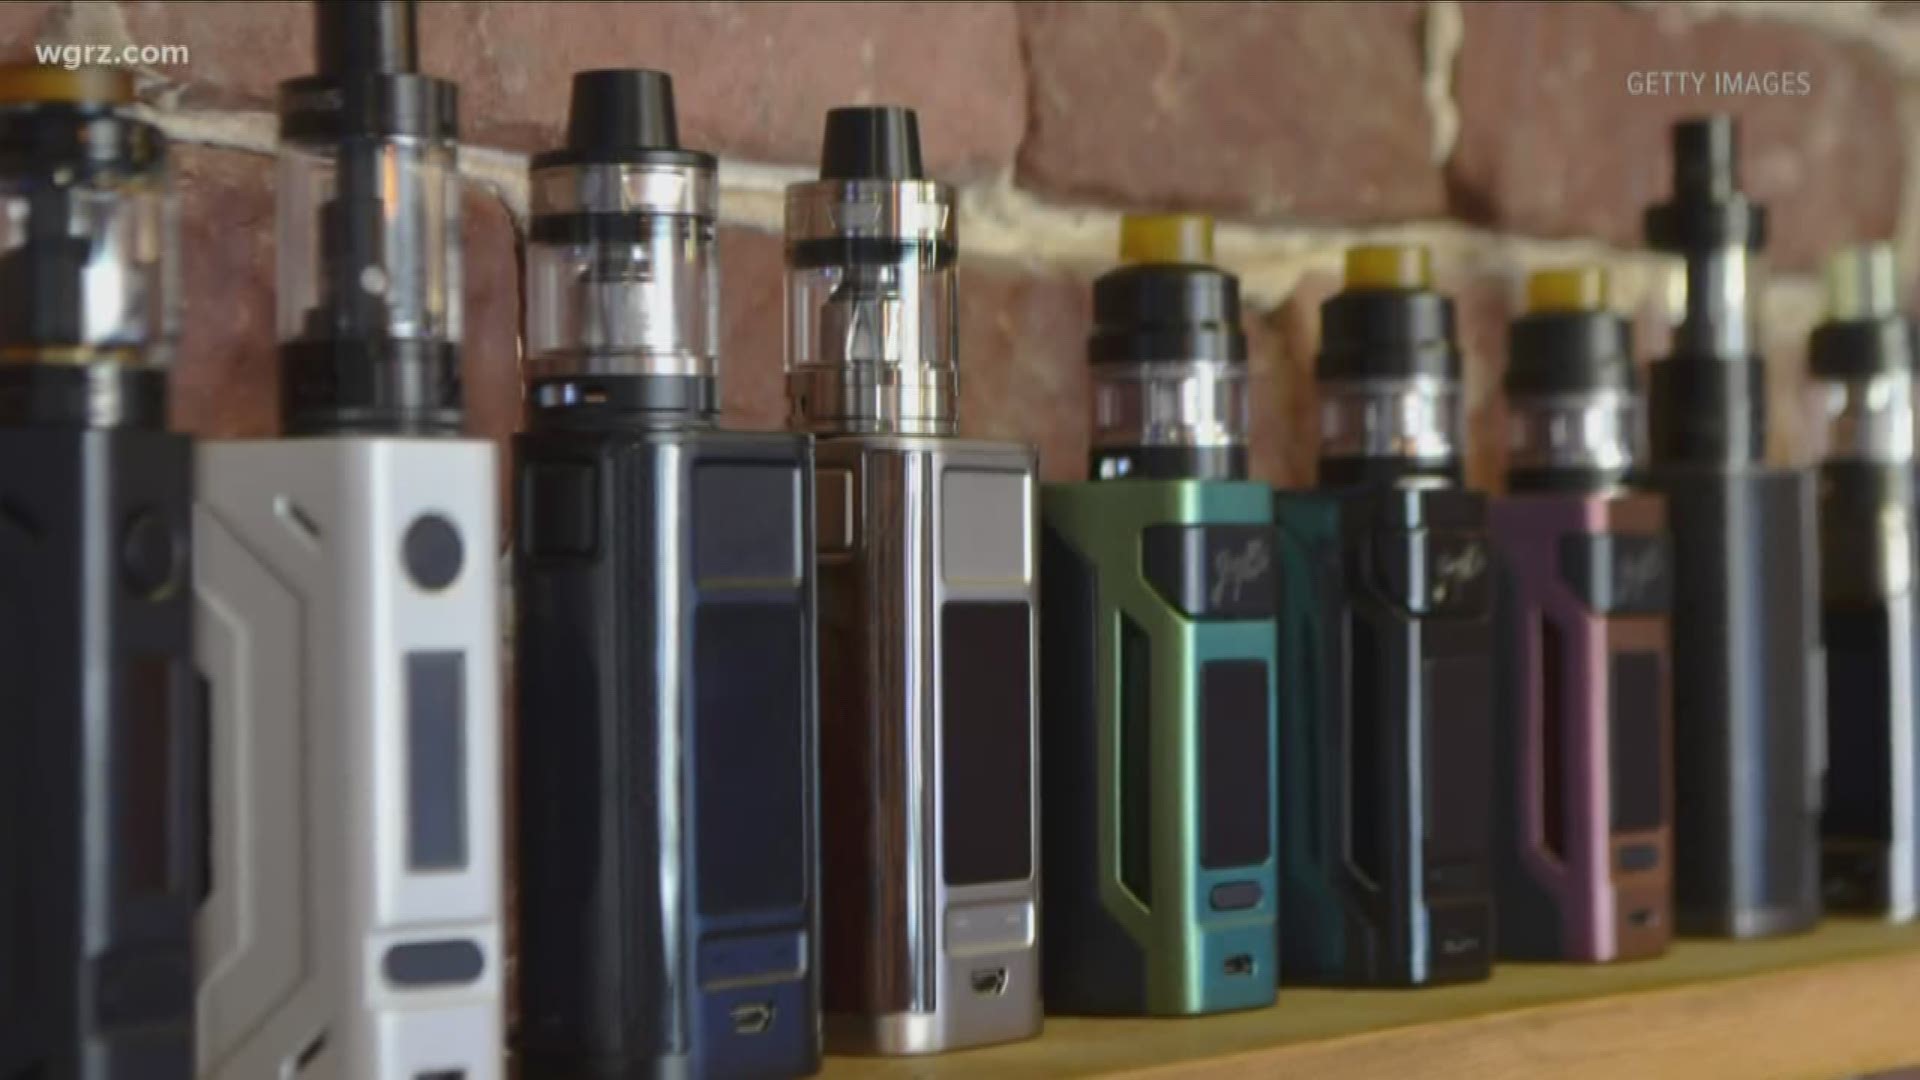 State supreme court judge struck down the health department's ban on flavored e-cigarettes. It's the conclusion of a lawsuit filed by state vaping groups.